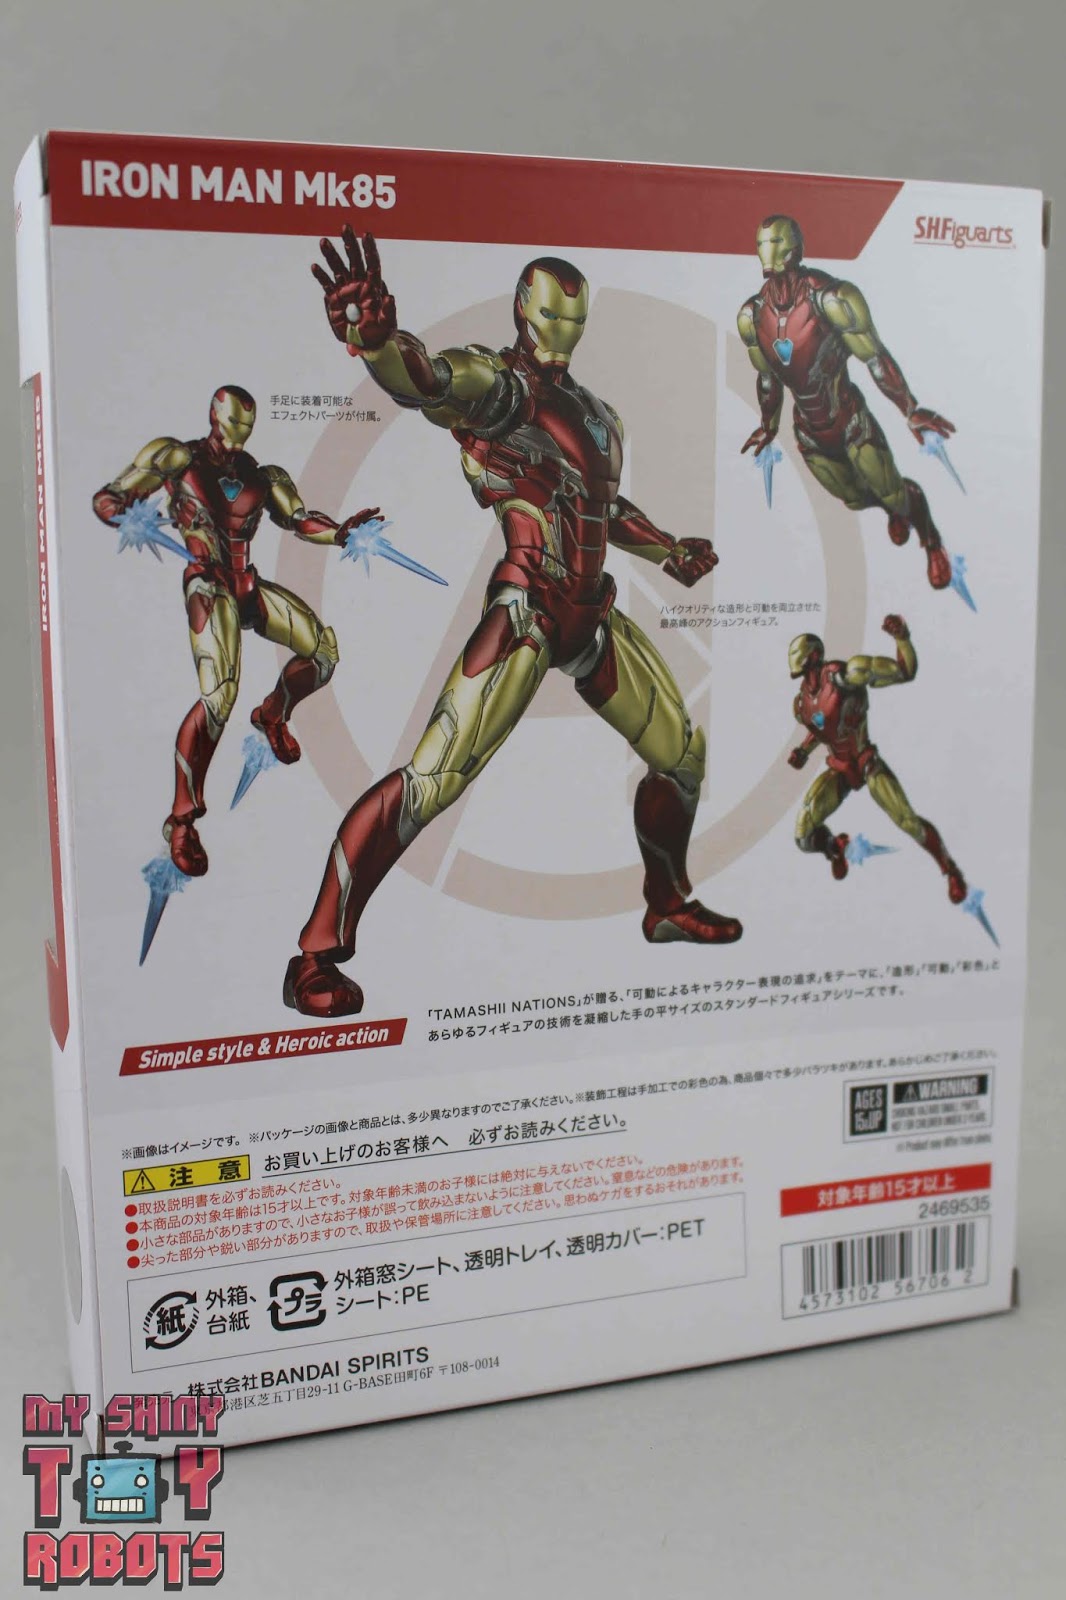 My Shiny Toy Robots: Toybox REVIEW: S.H. Figuarts Iron Man Mk